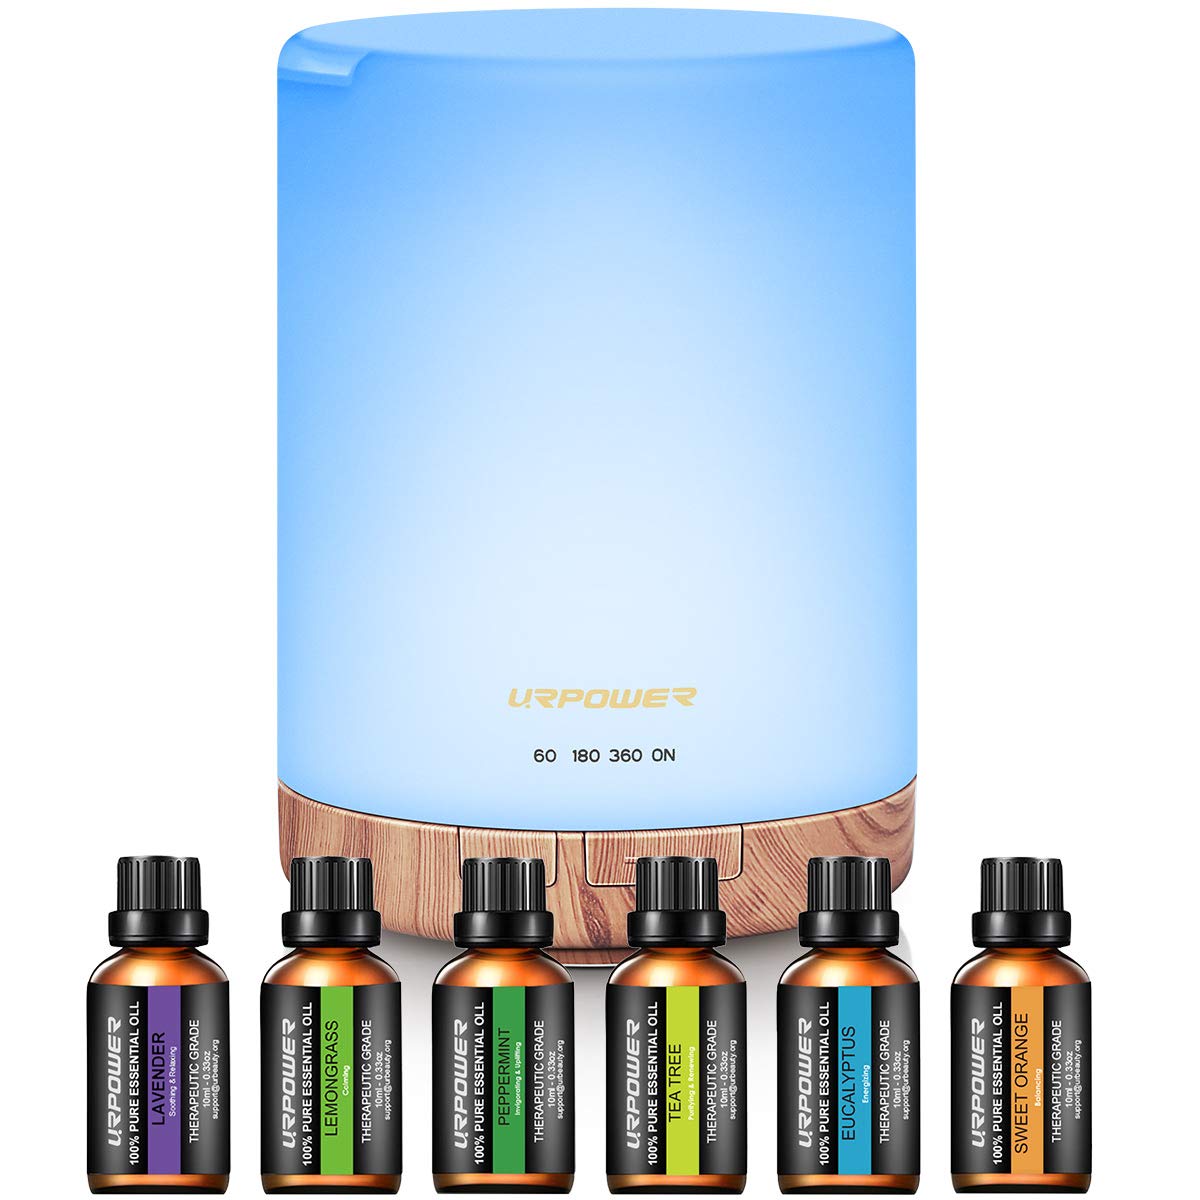 URPOWER 300ml Essential Oil Diffuser with 6 Bottles 10ml Most Popular 100% Pure Aromatherapy Essential Oils, Aroma Gift Set Cool Mist Humidifier with 15 Lighting Modes Light for Bedroom Home Office